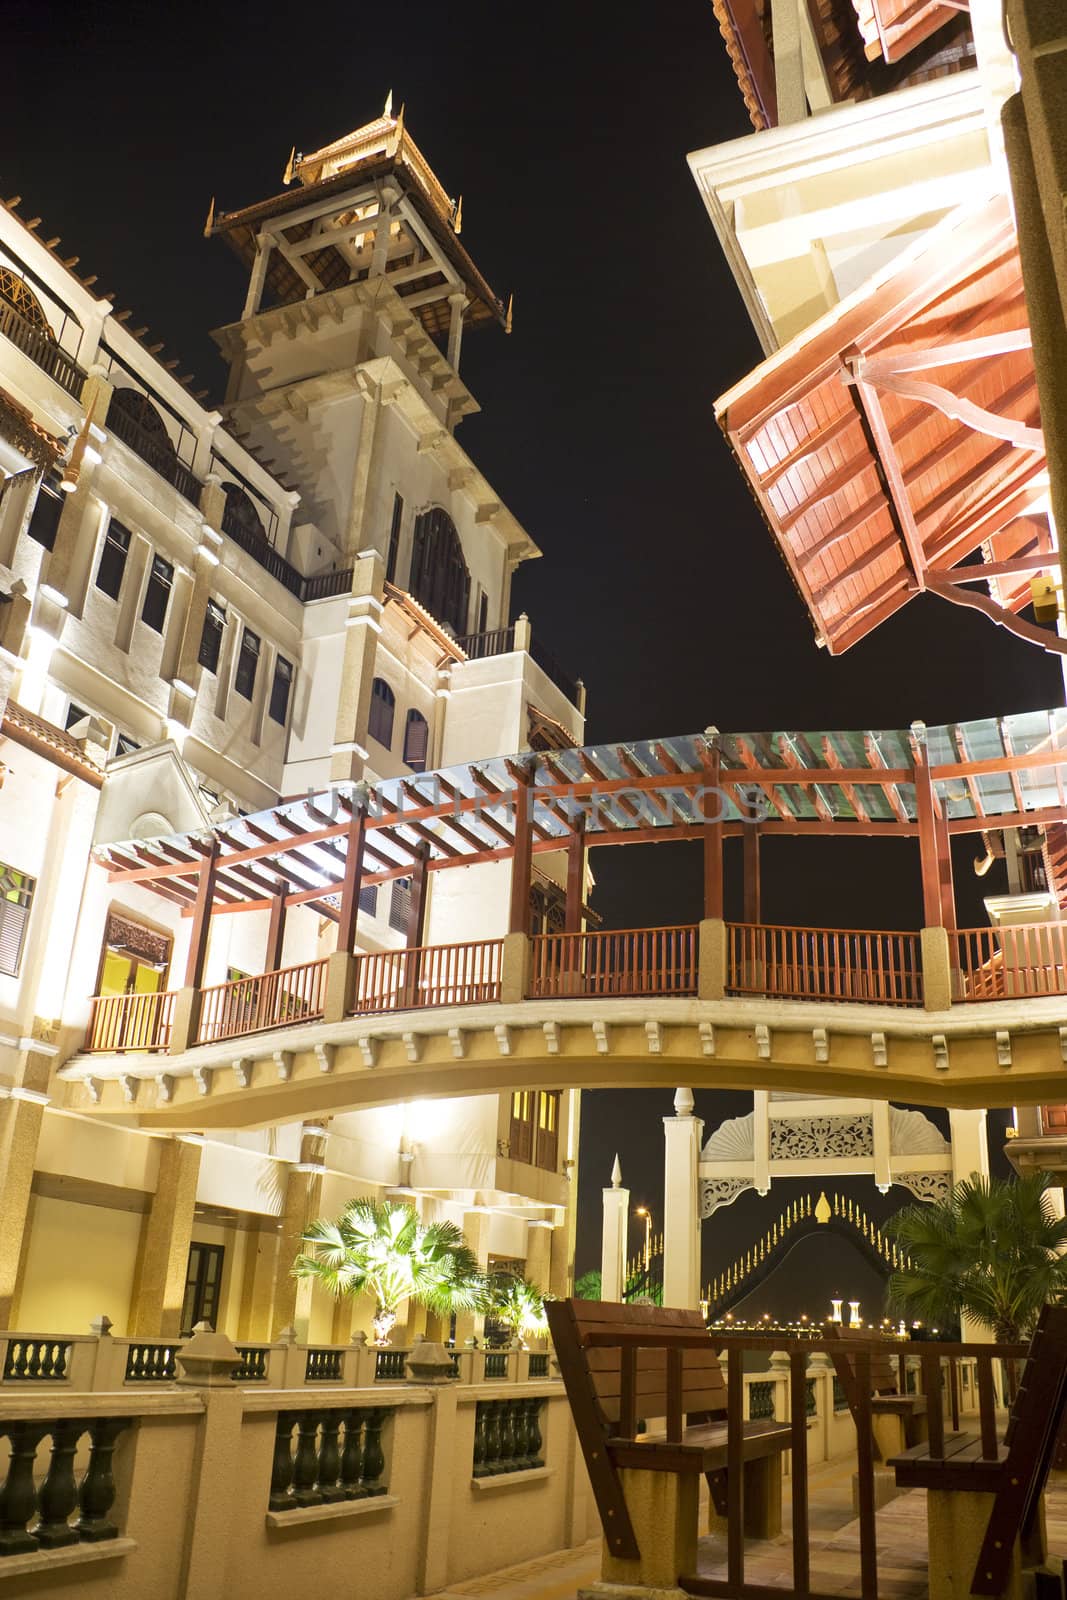 Night image of modern buidings with Malaysian traditional architectural influence.